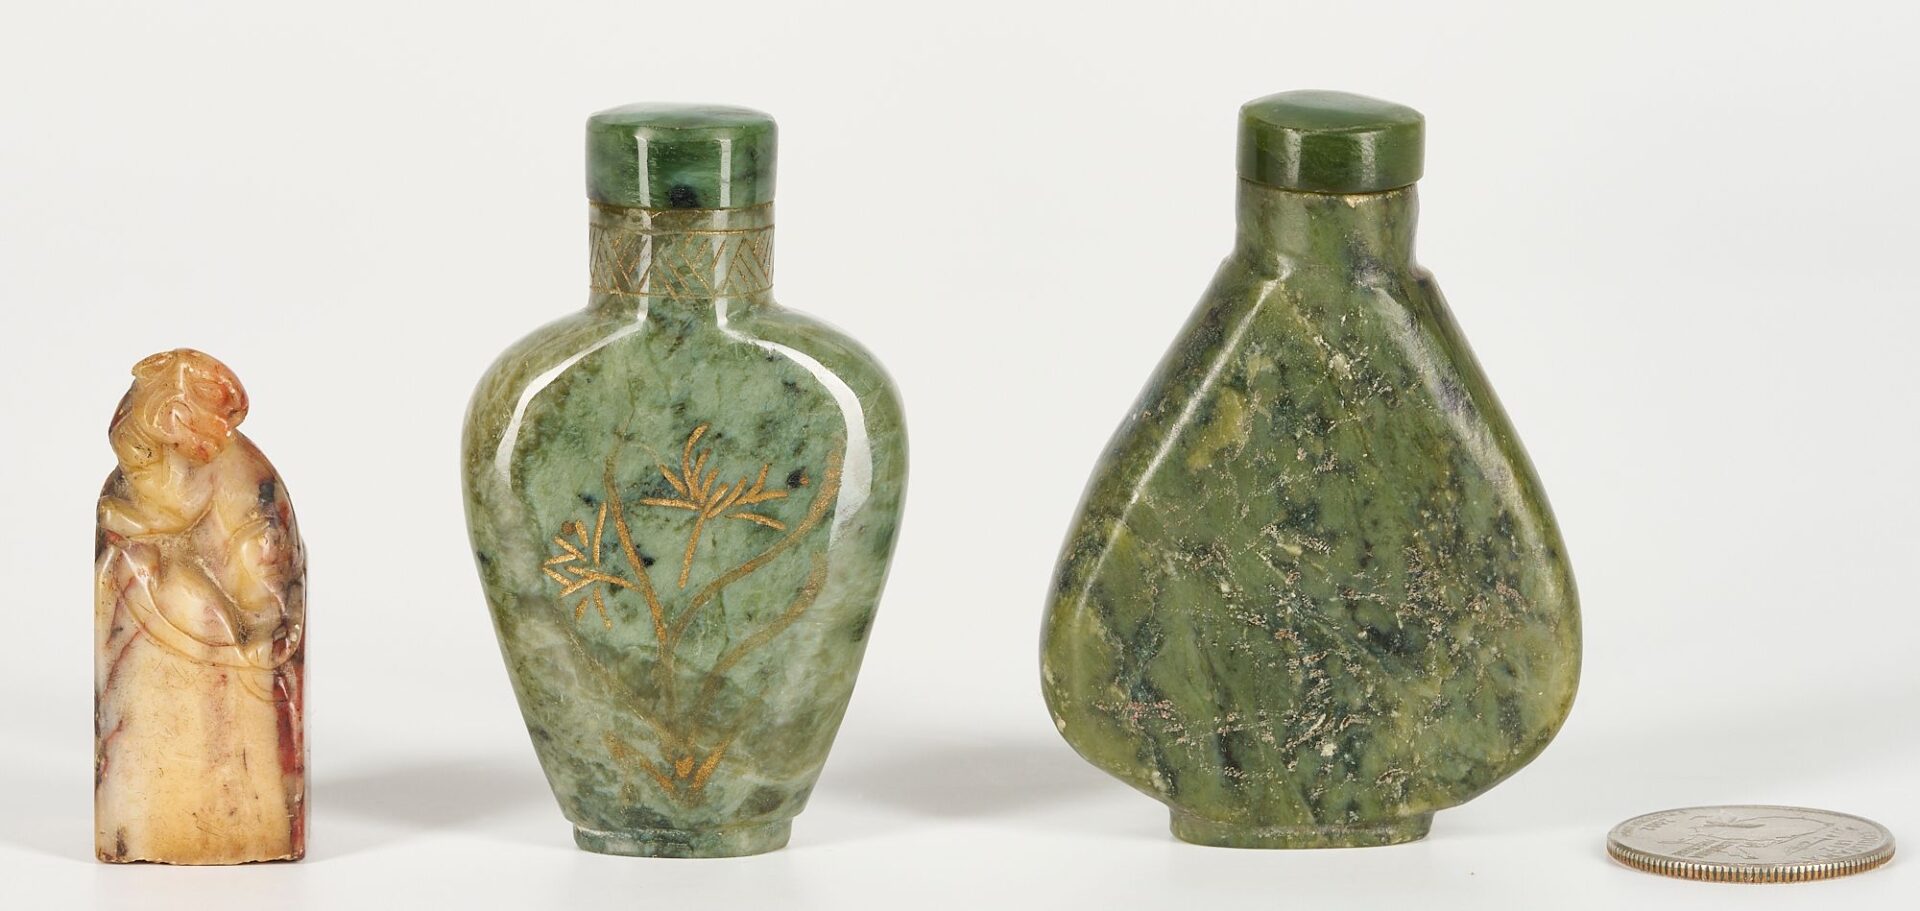 Lot 874: 3 Chinese Carved Items, 2 Jade Snuff Bottles & 1 Hardstone Seal